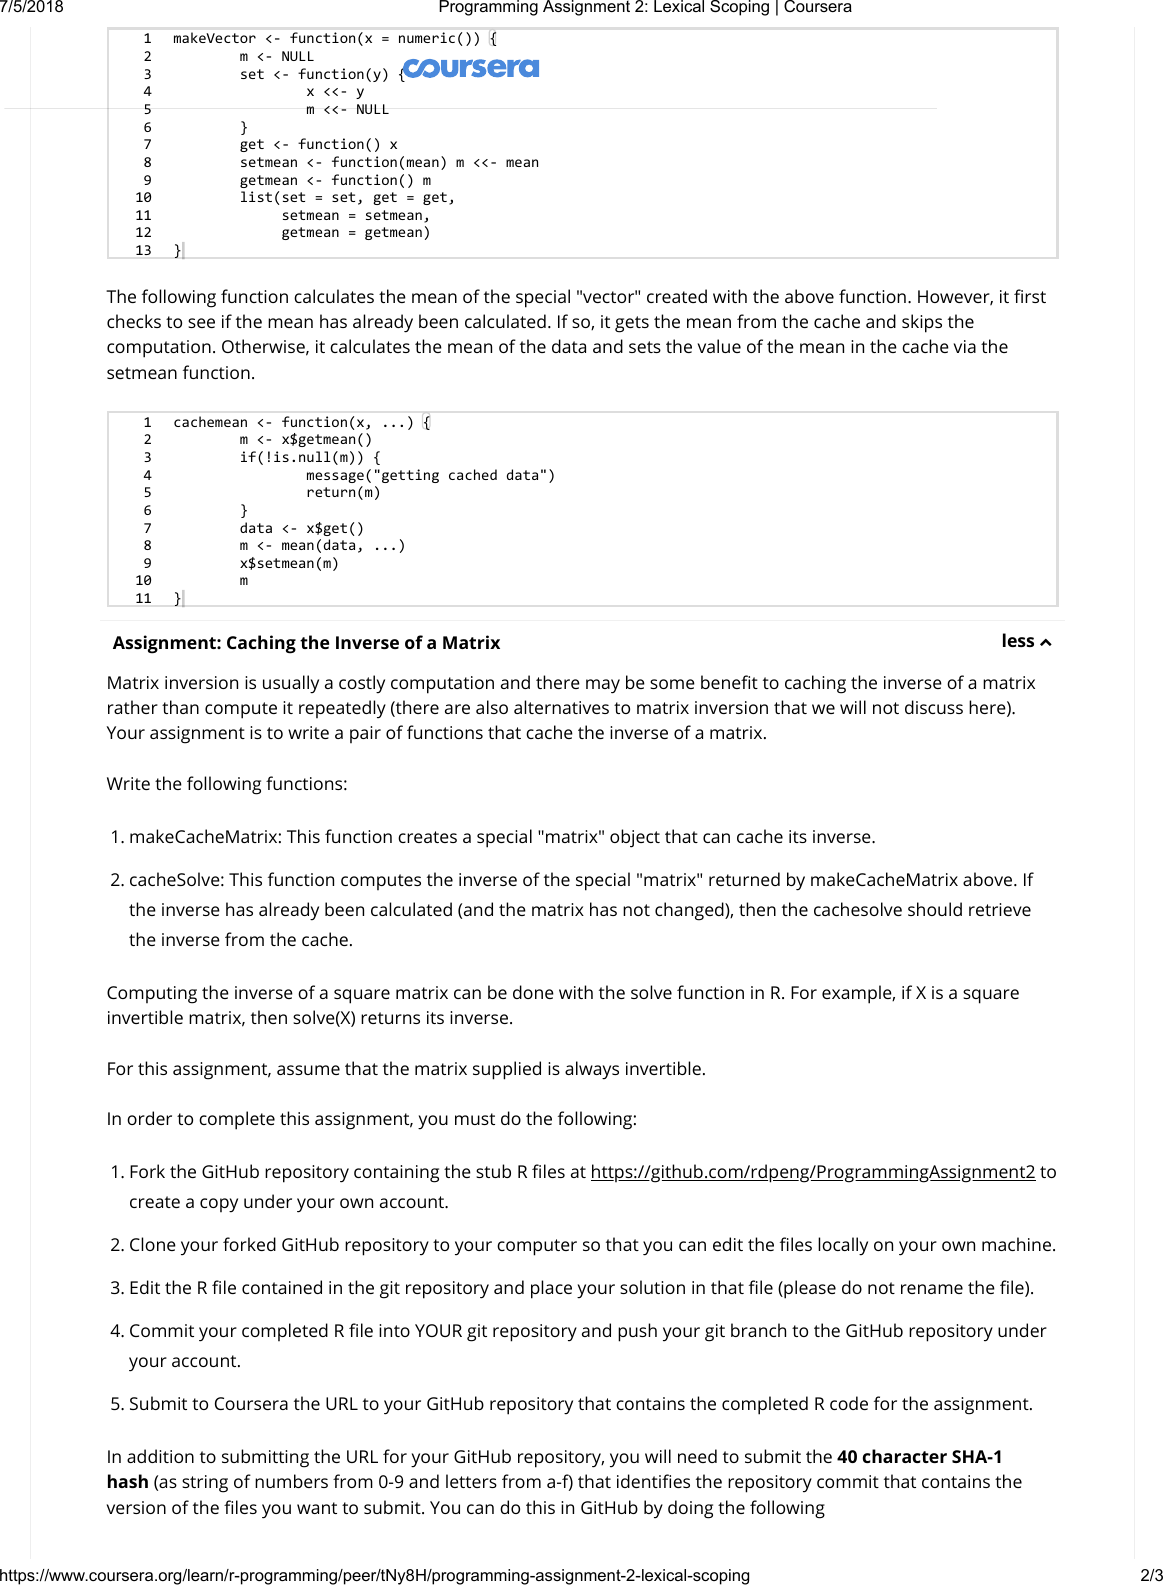 programming assignment 2 lexical scoping answer